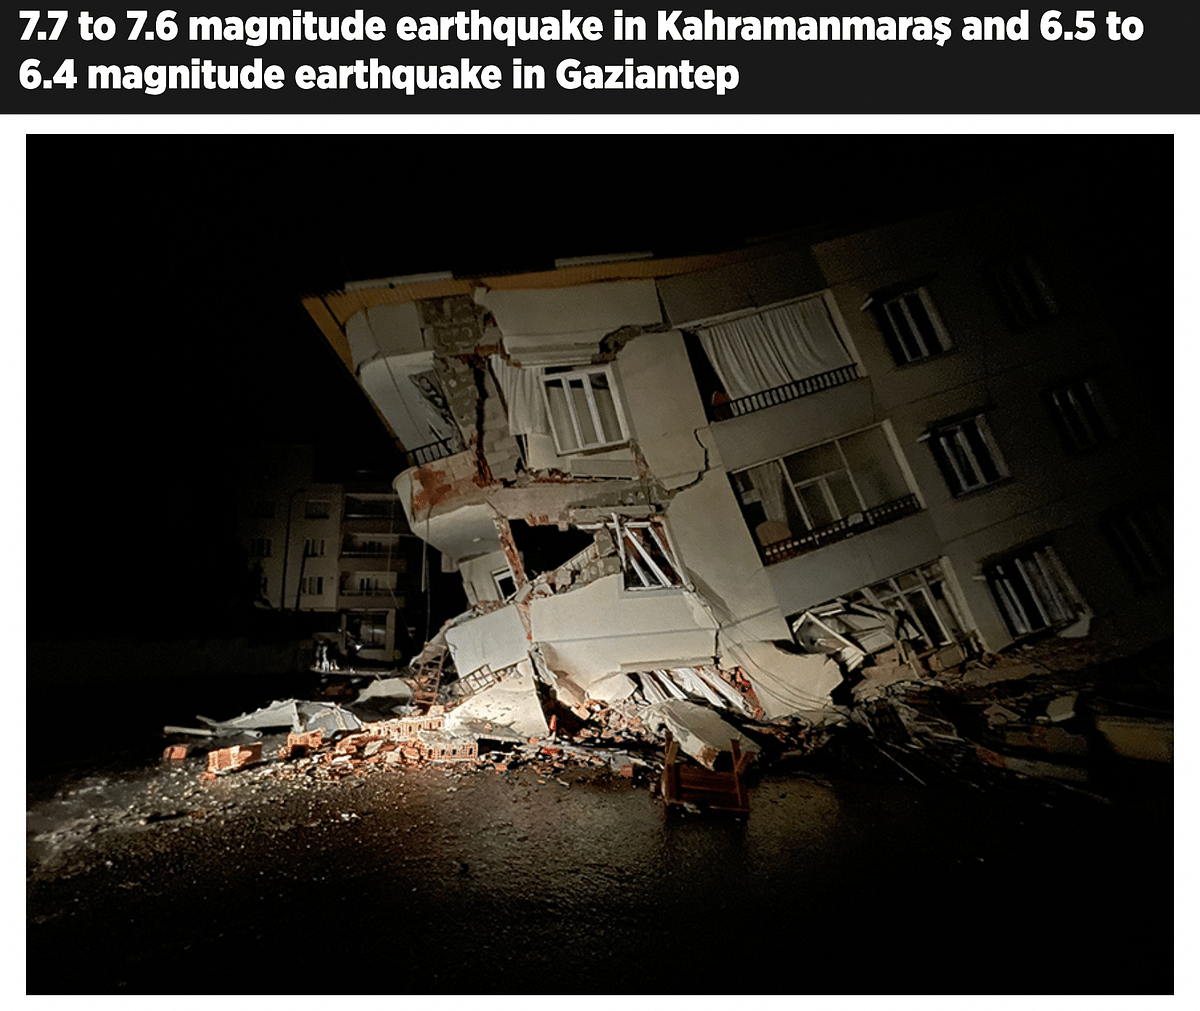 The photo is from Turkey, which experienced strong earthquakes on 6 February.